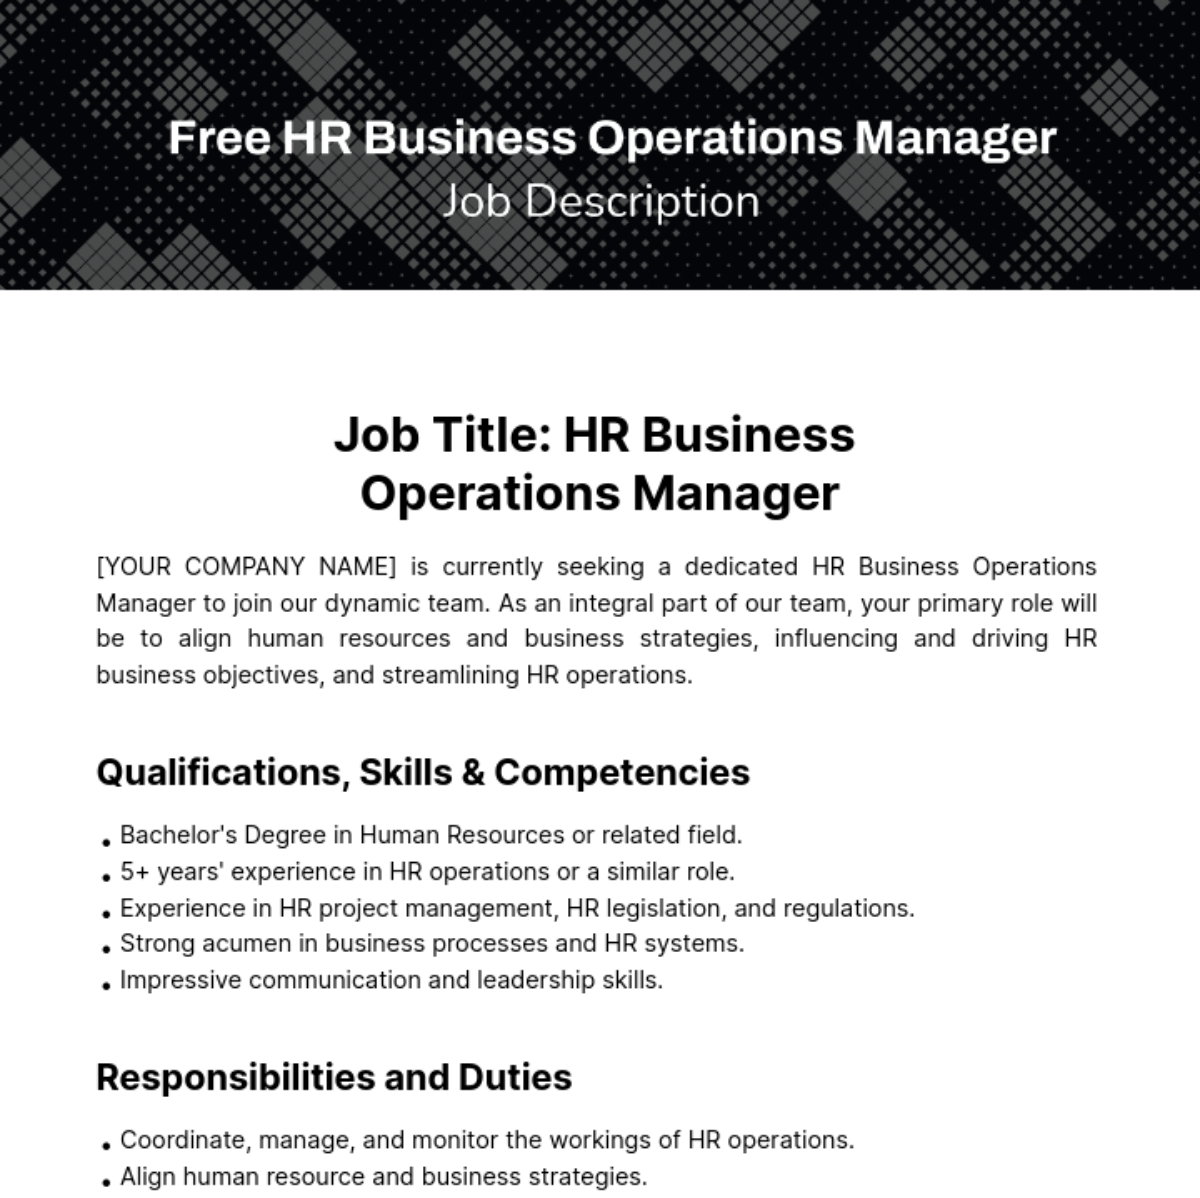 Free HR Business Operations Manager Job Description Template